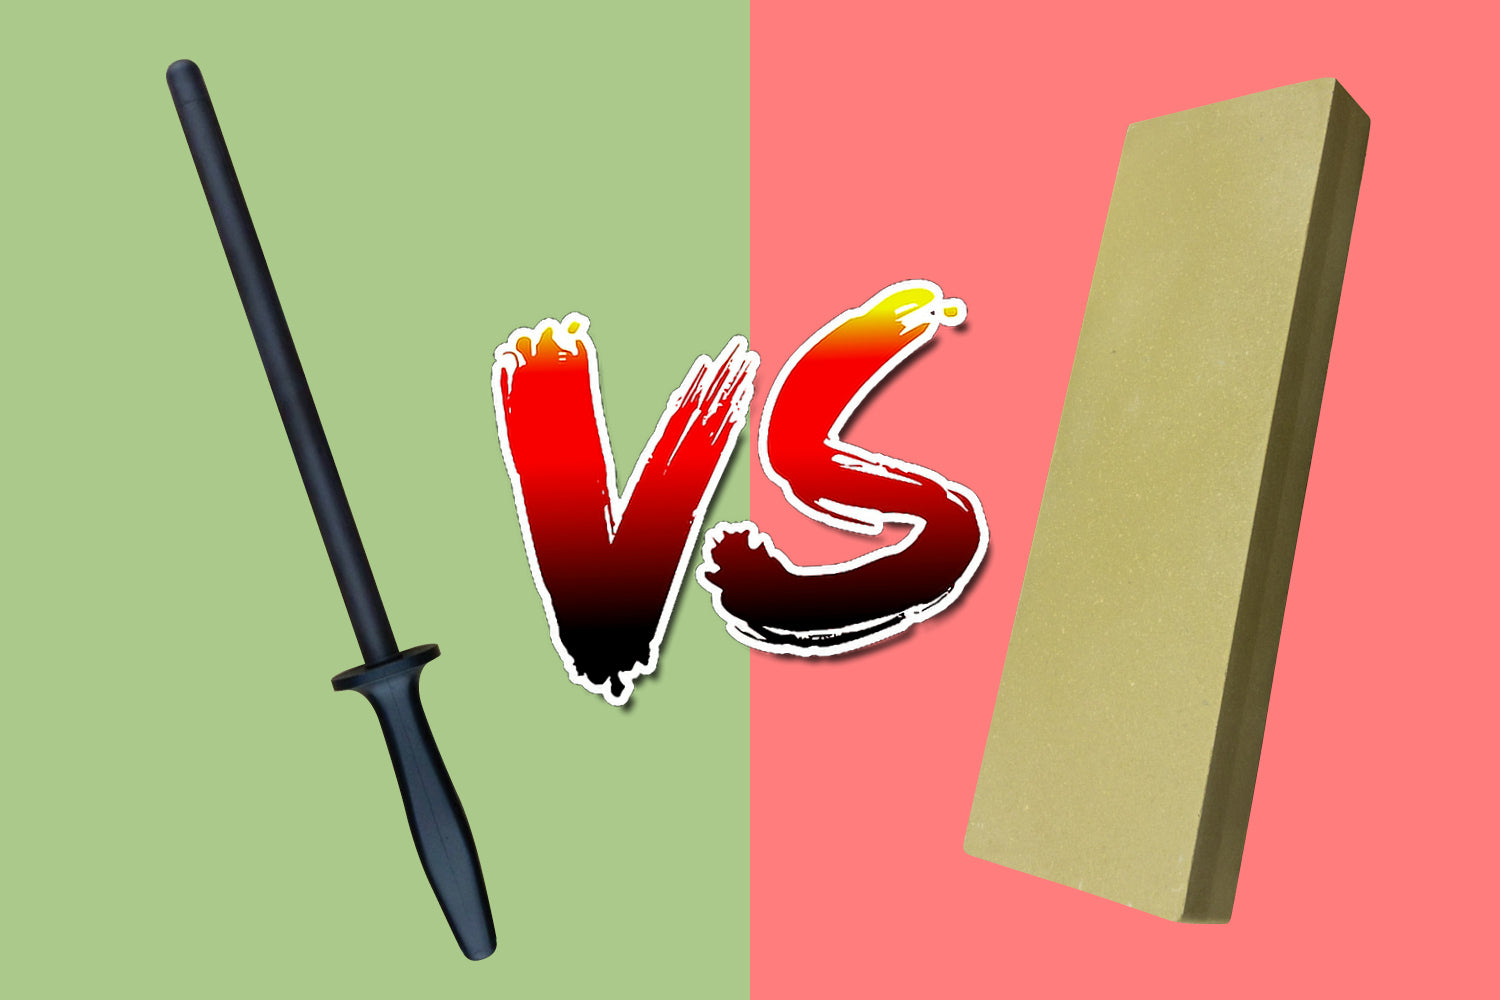 What's the Difference Between Honing and Sharpening a Knife?